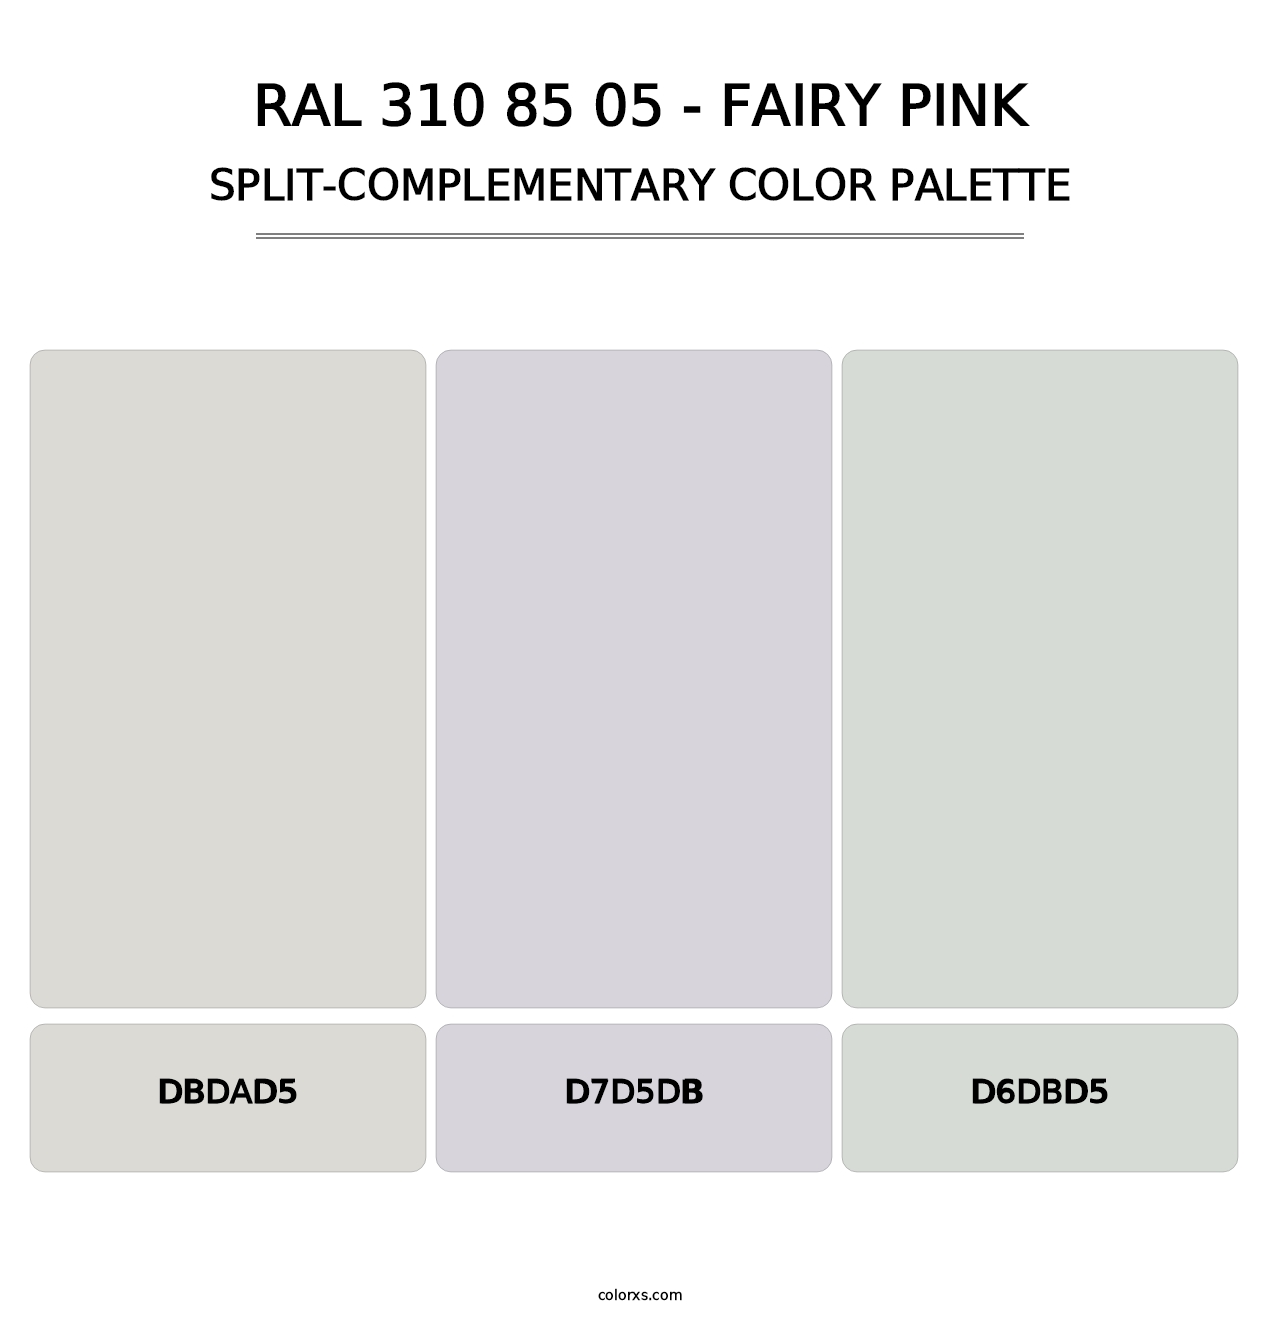 RAL 310 85 05 - Fairy Pink - Split-Complementary Color Palette